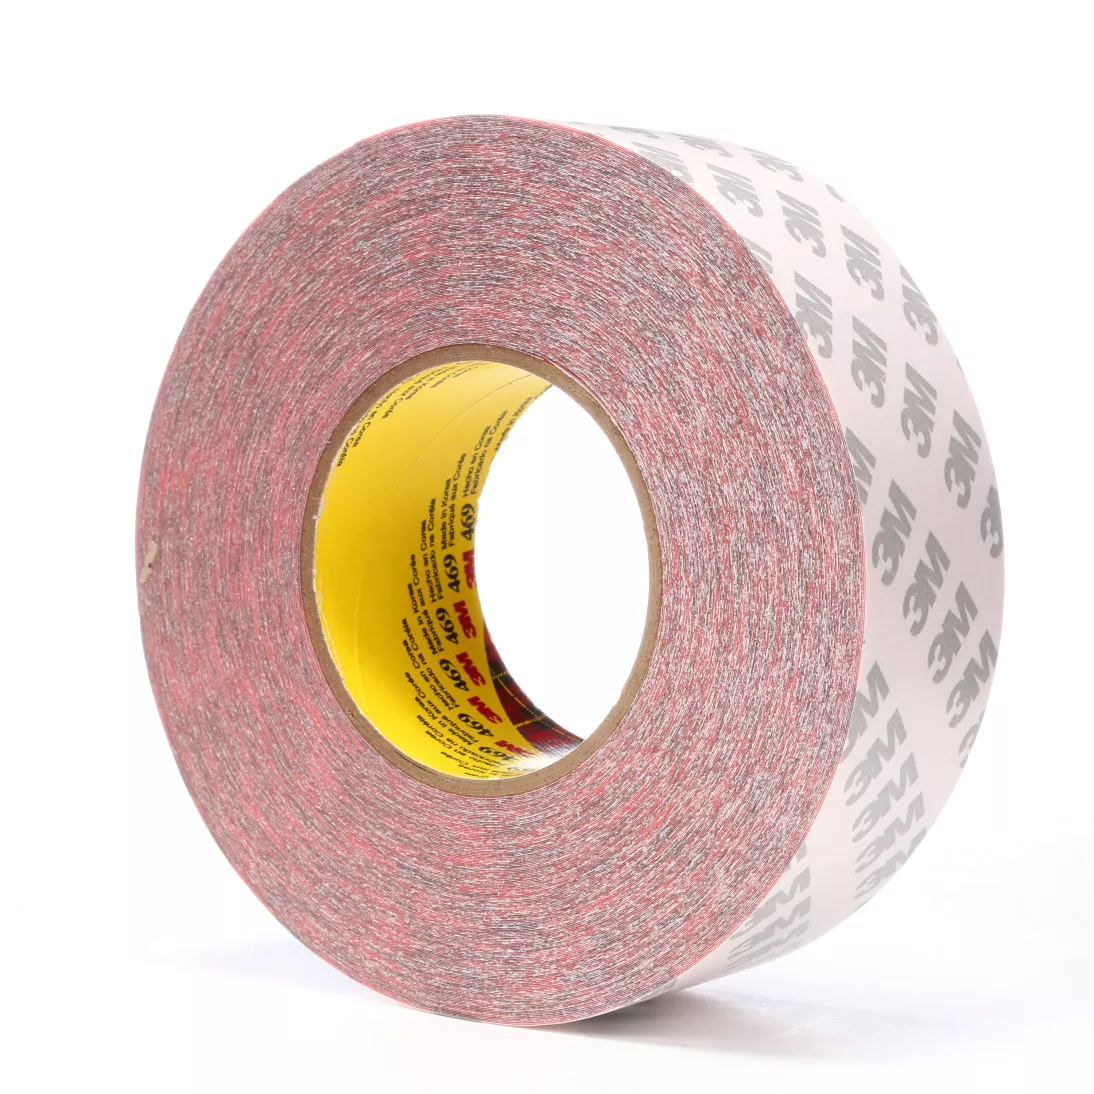 3M™ Double Coated Tape 469, Red, 2 in x 60 yd, 16 rolls per case